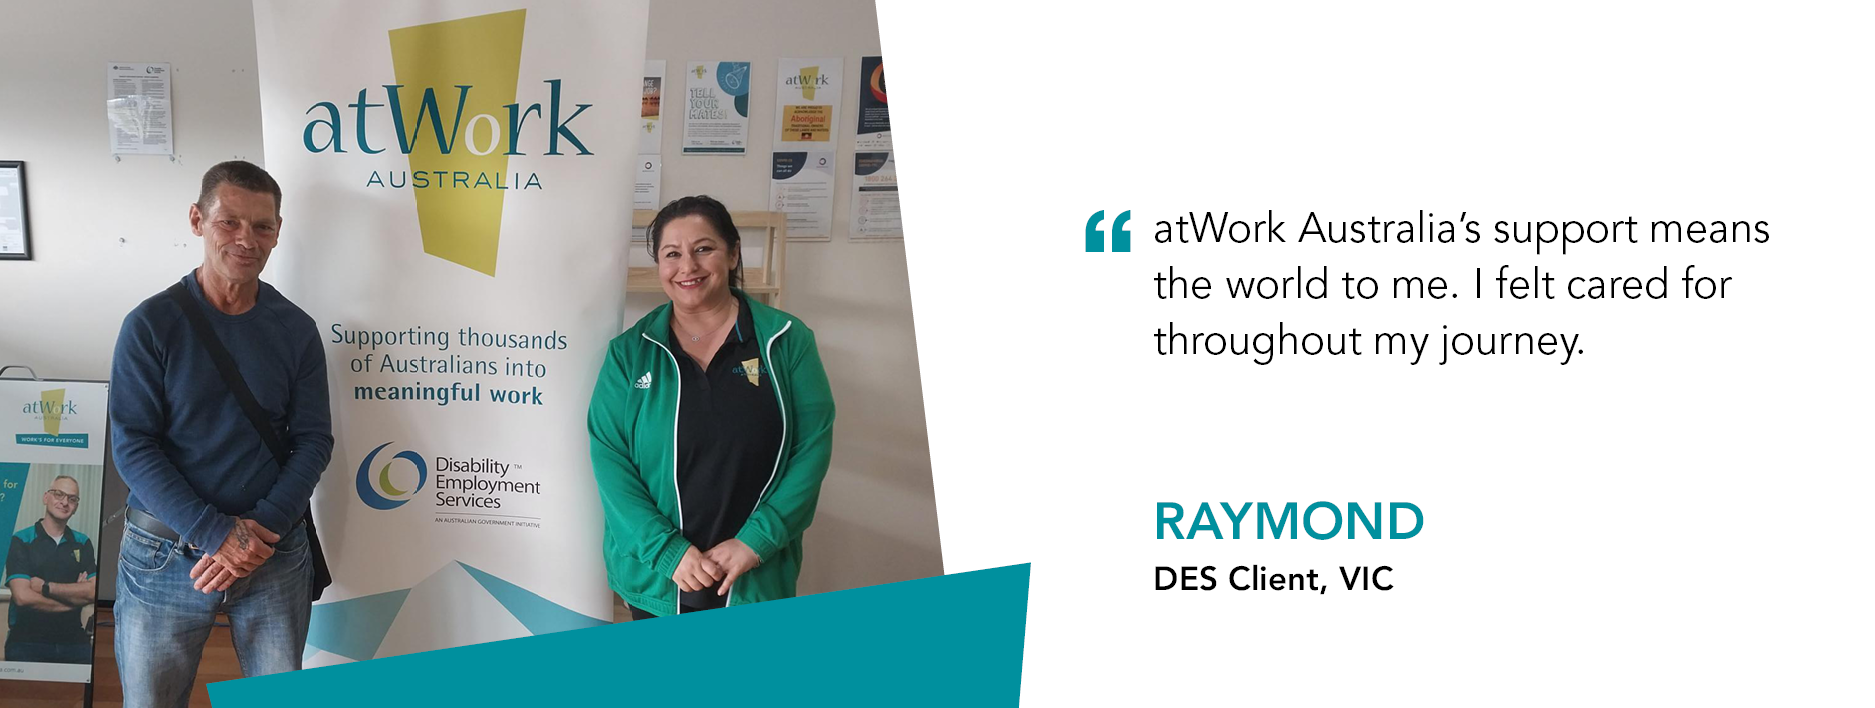 Quote reads: "atWork Australia's support means the world to me. I felt cared for throughout my journery" said Raymond, Disability Employment Services Client, VIC.